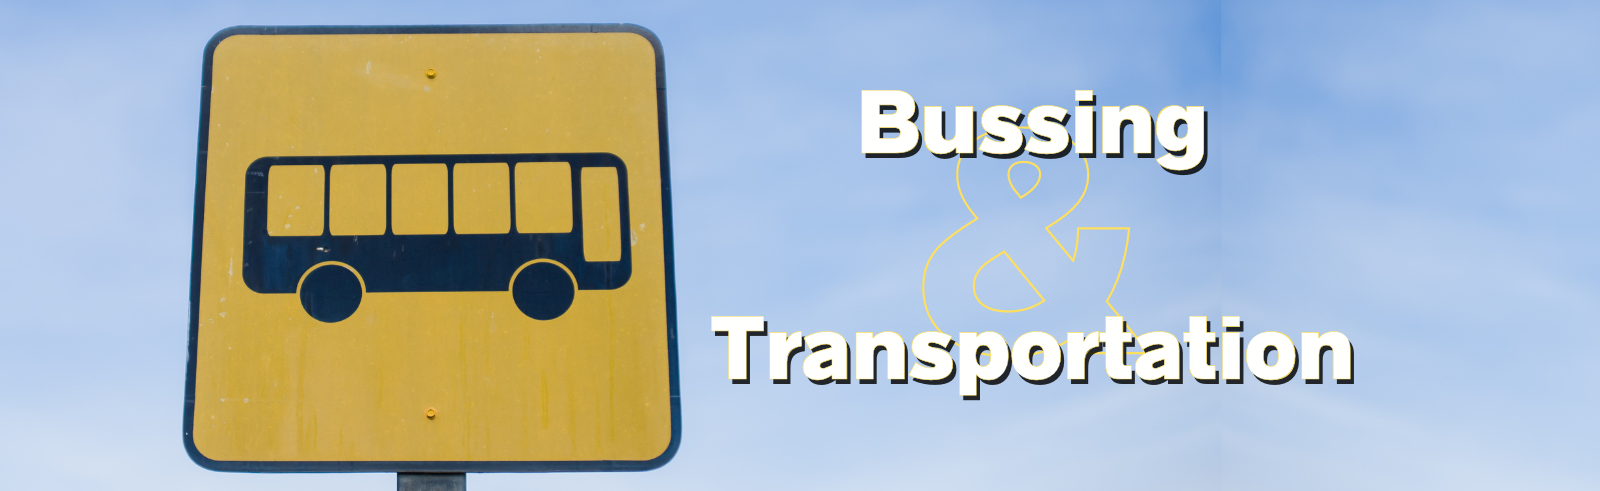 Buses and Transportation